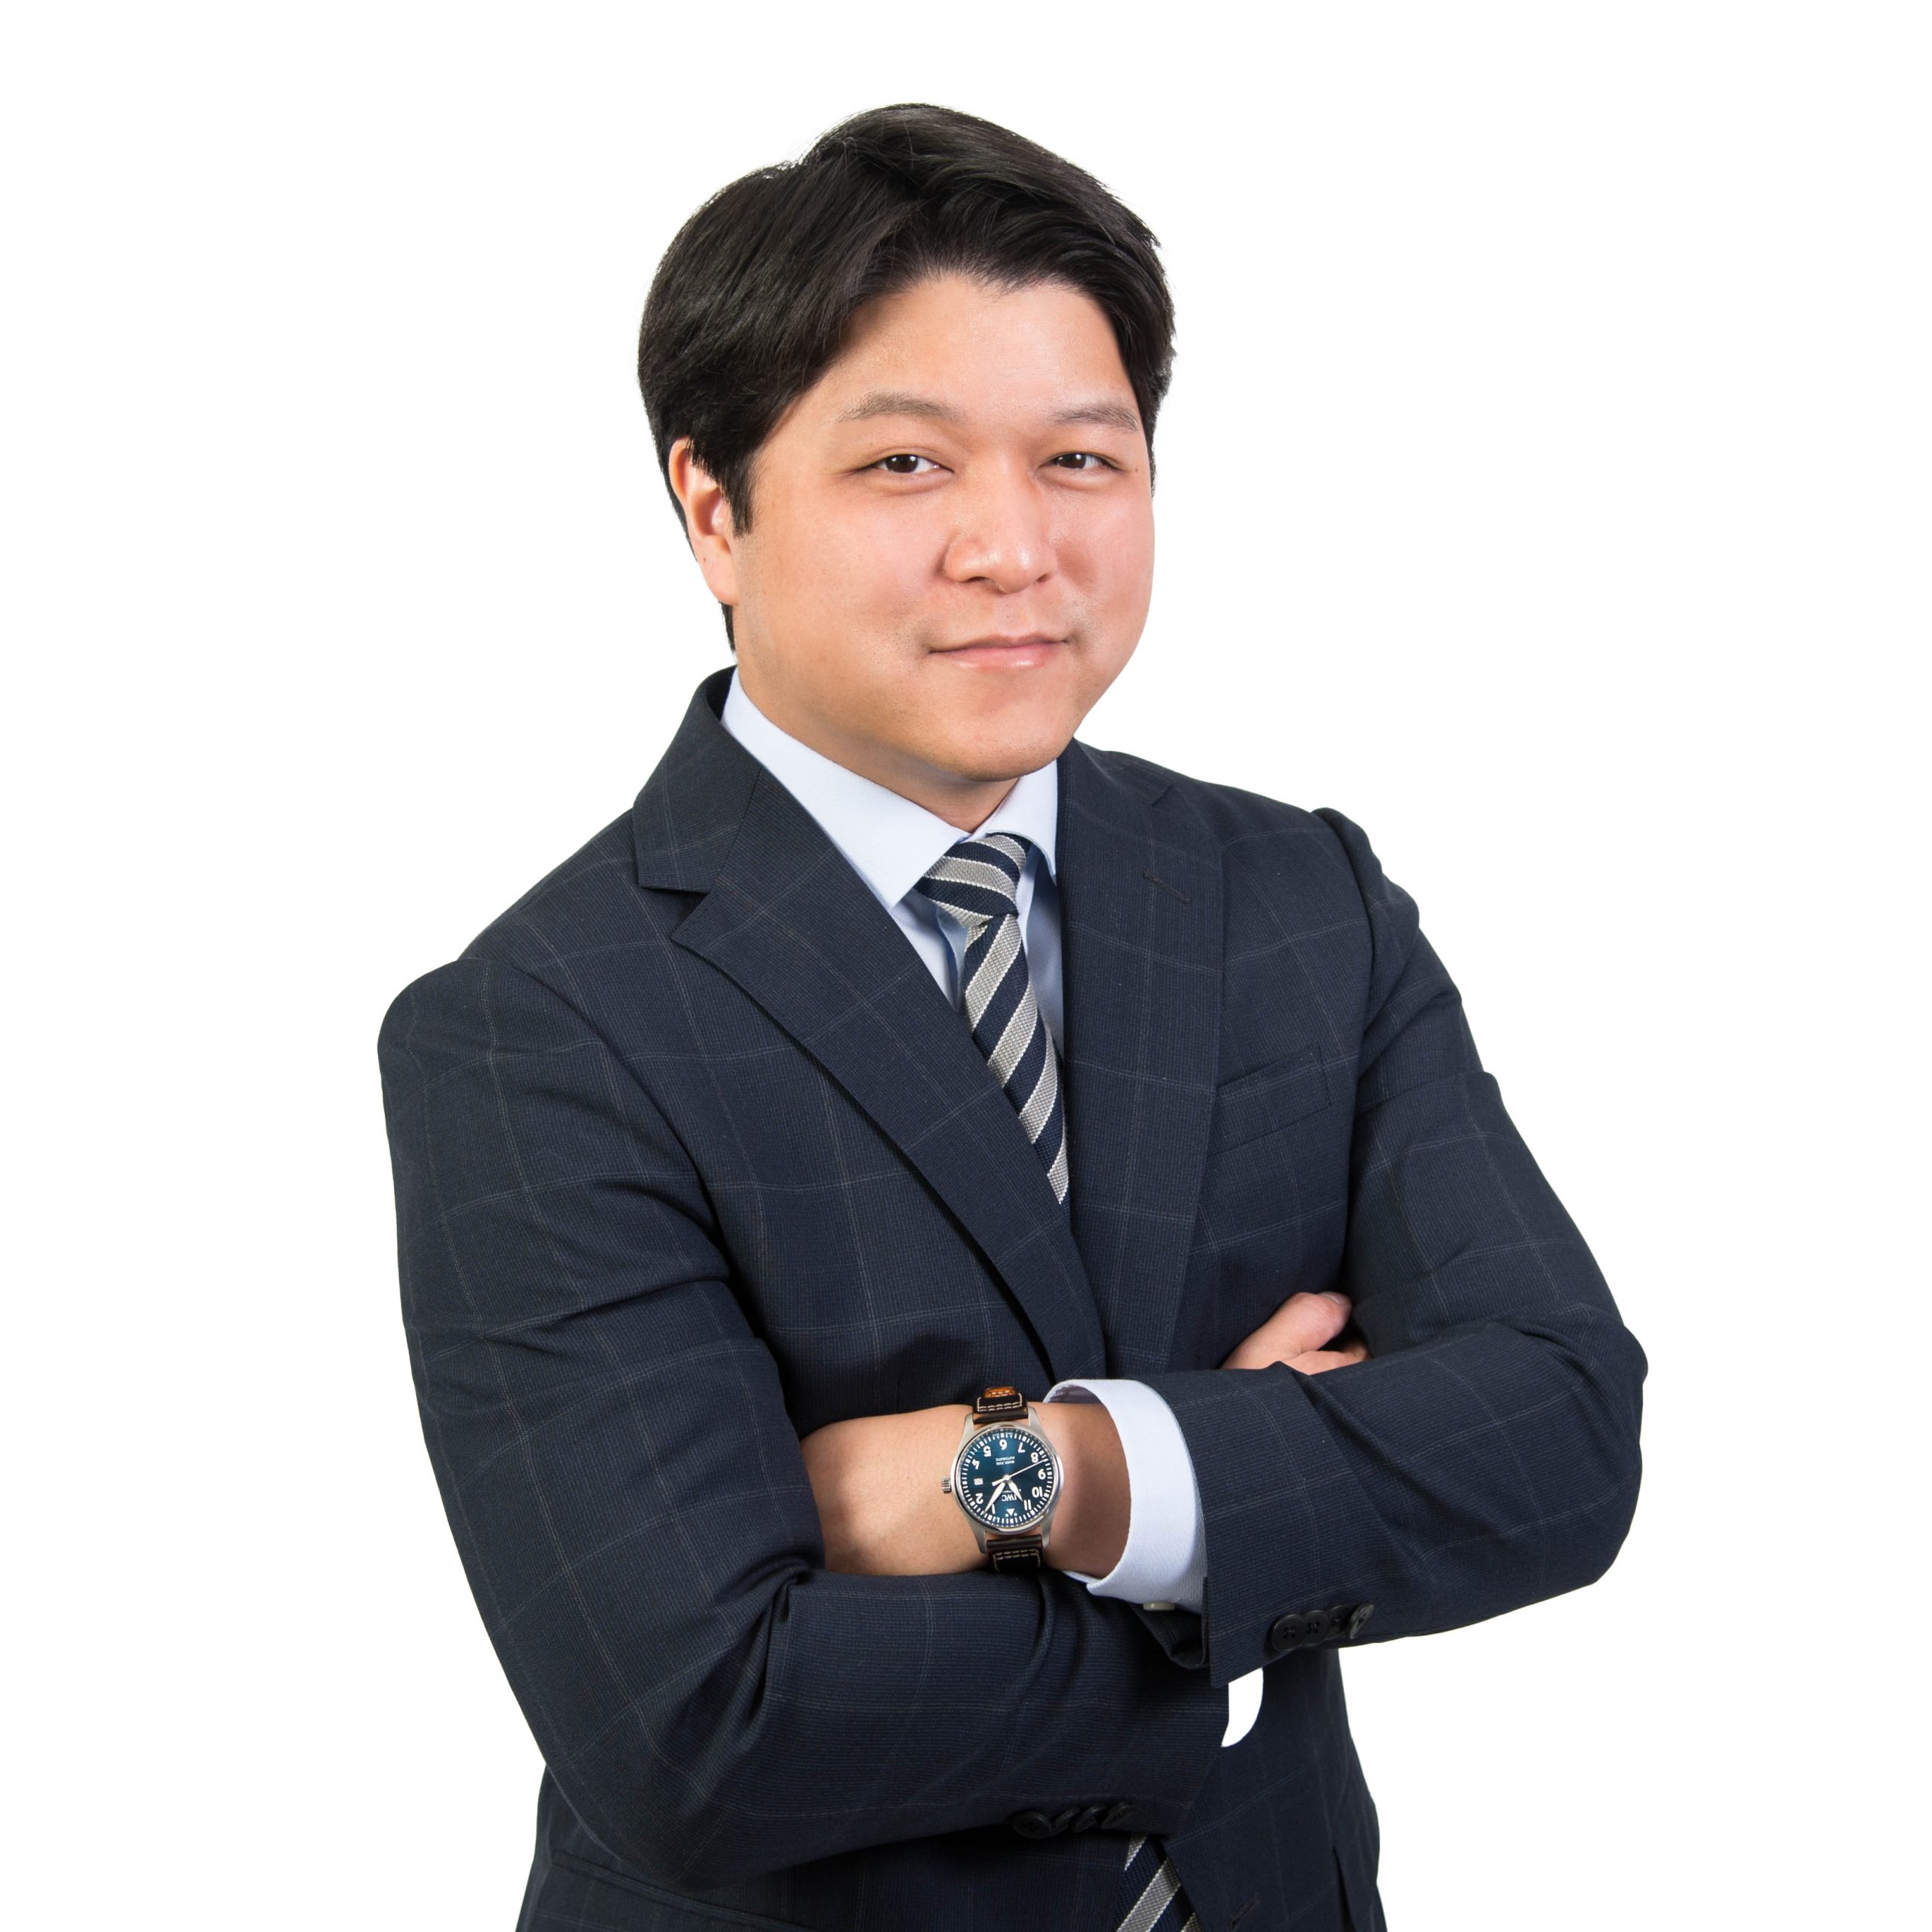 Justin Chun Ting Lo, professional commercial & real estate lawyer